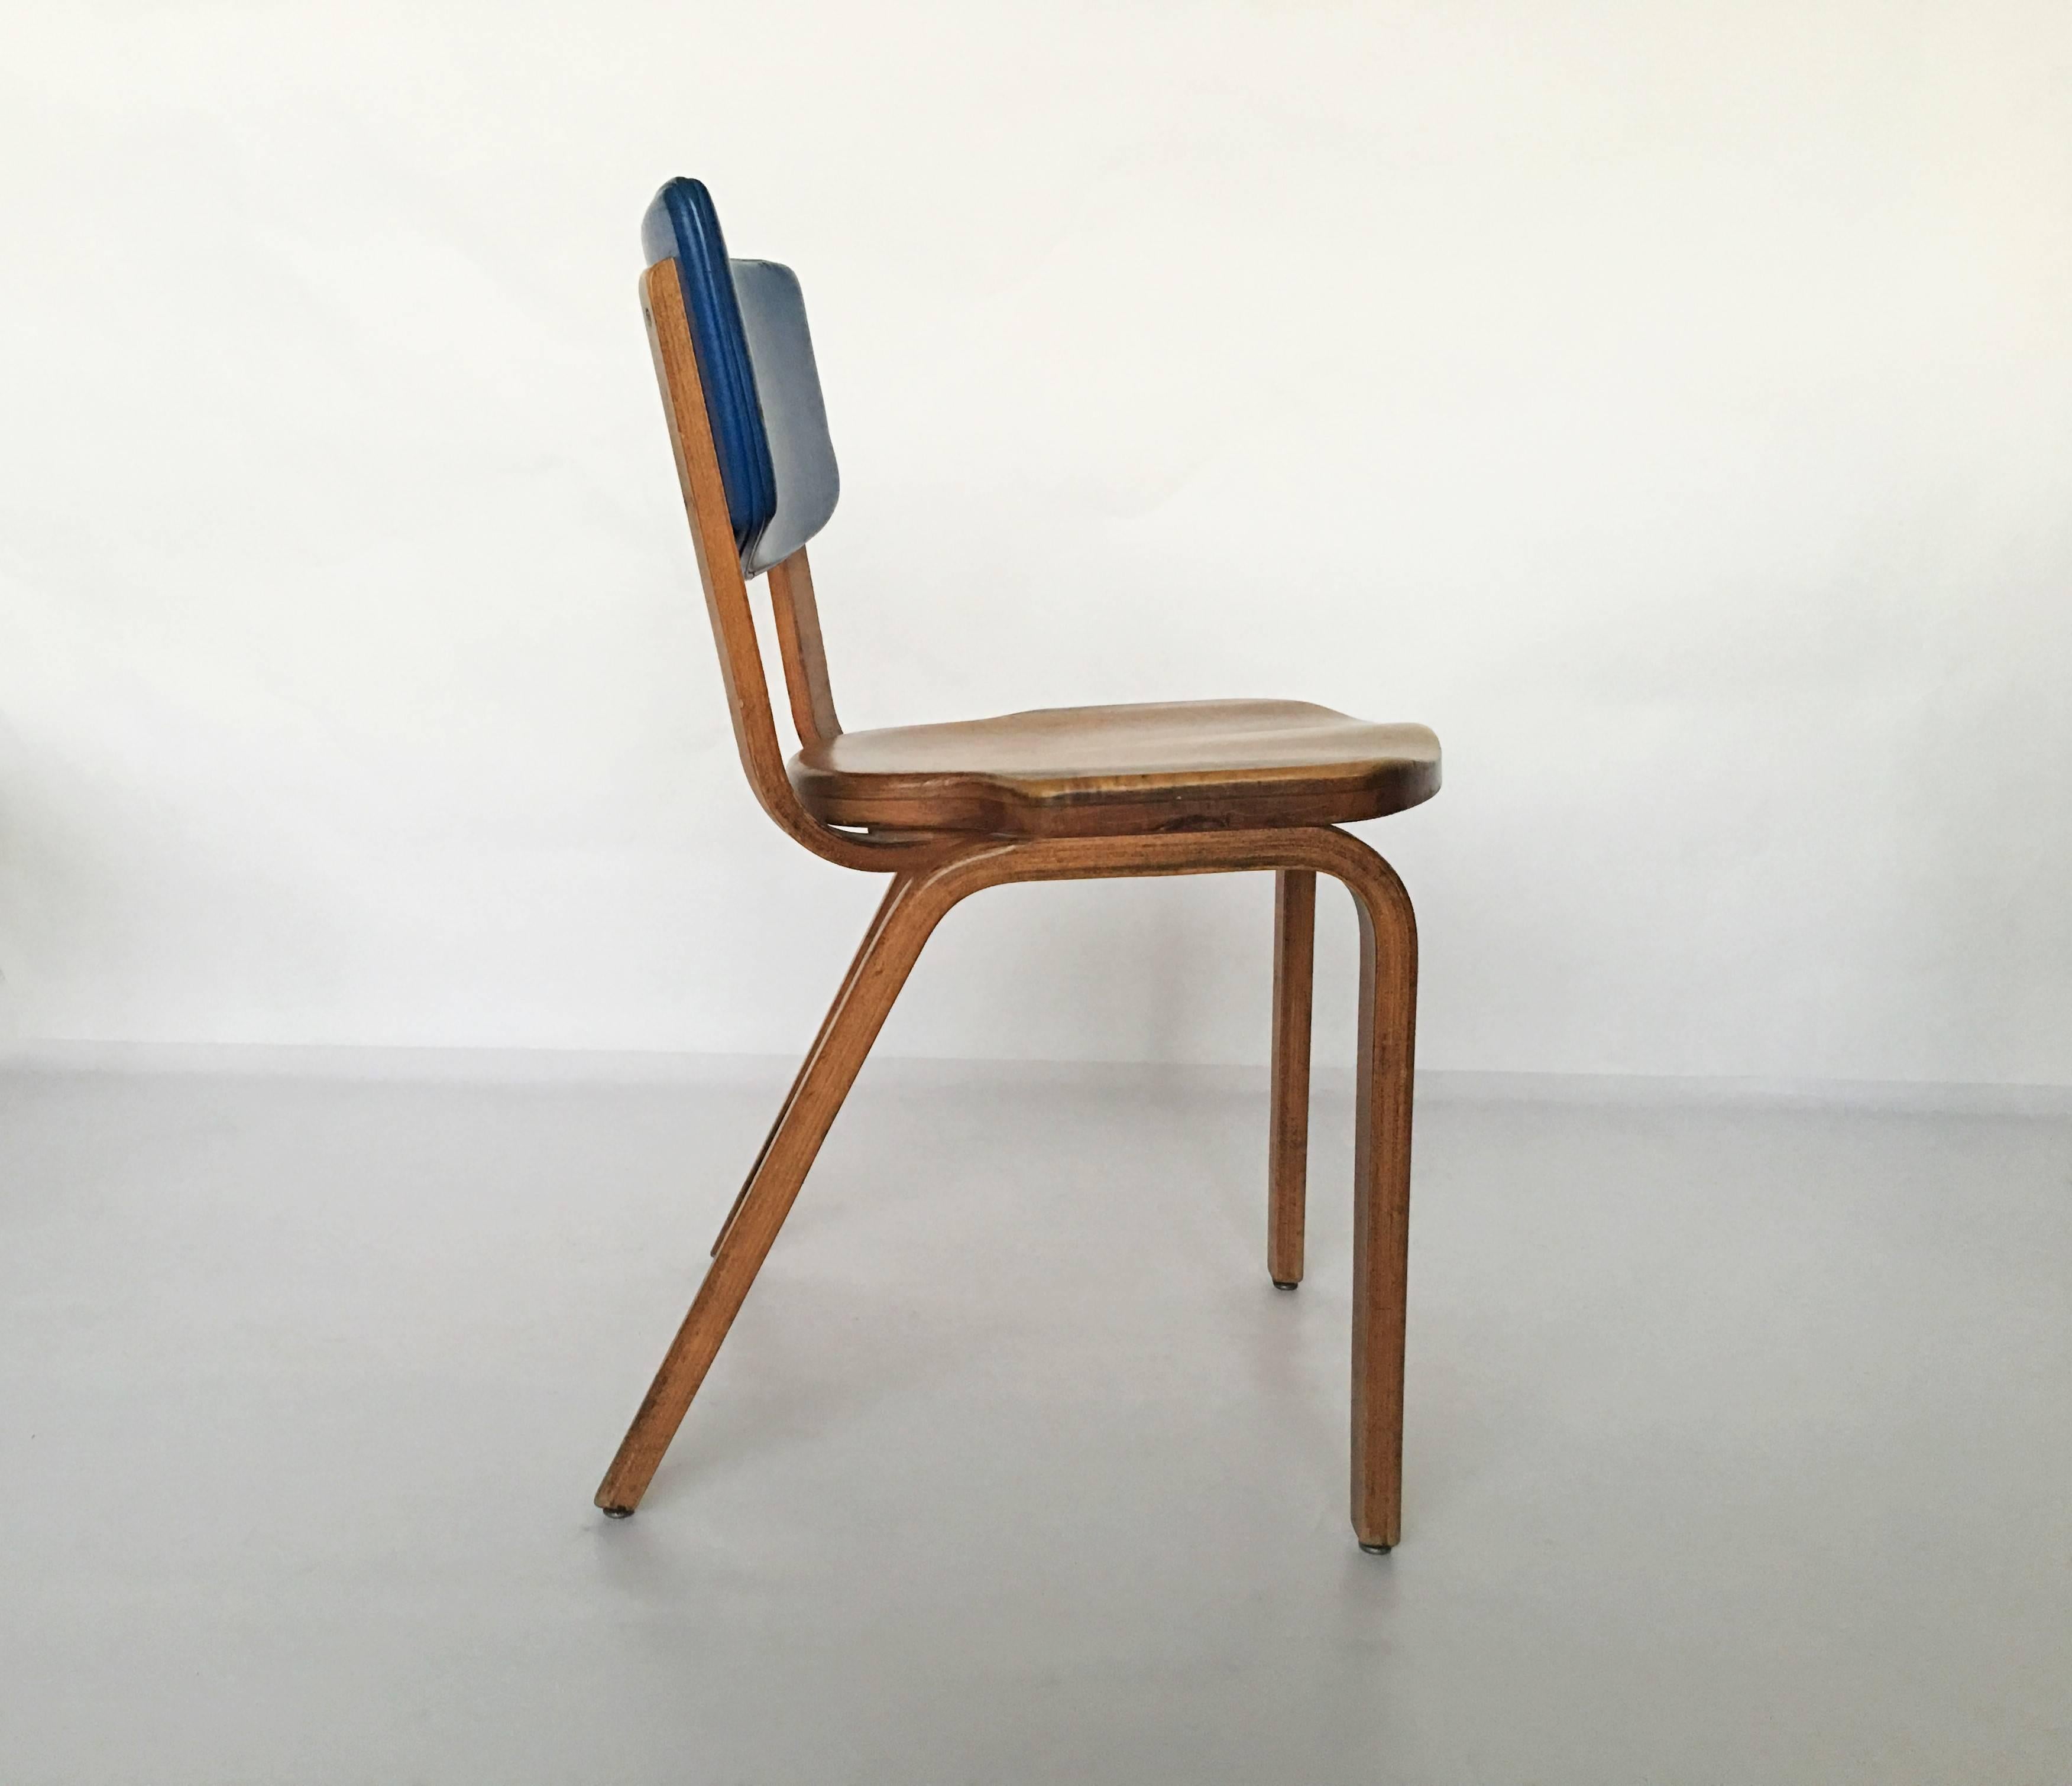 Iconic set of eight Thonet dining chairs in original condition. These are very early examples of this design. Bent plywood chairs with back rests covered in a blue vinyl. Worn, stained and small tears (see picture) but structurally solid with no